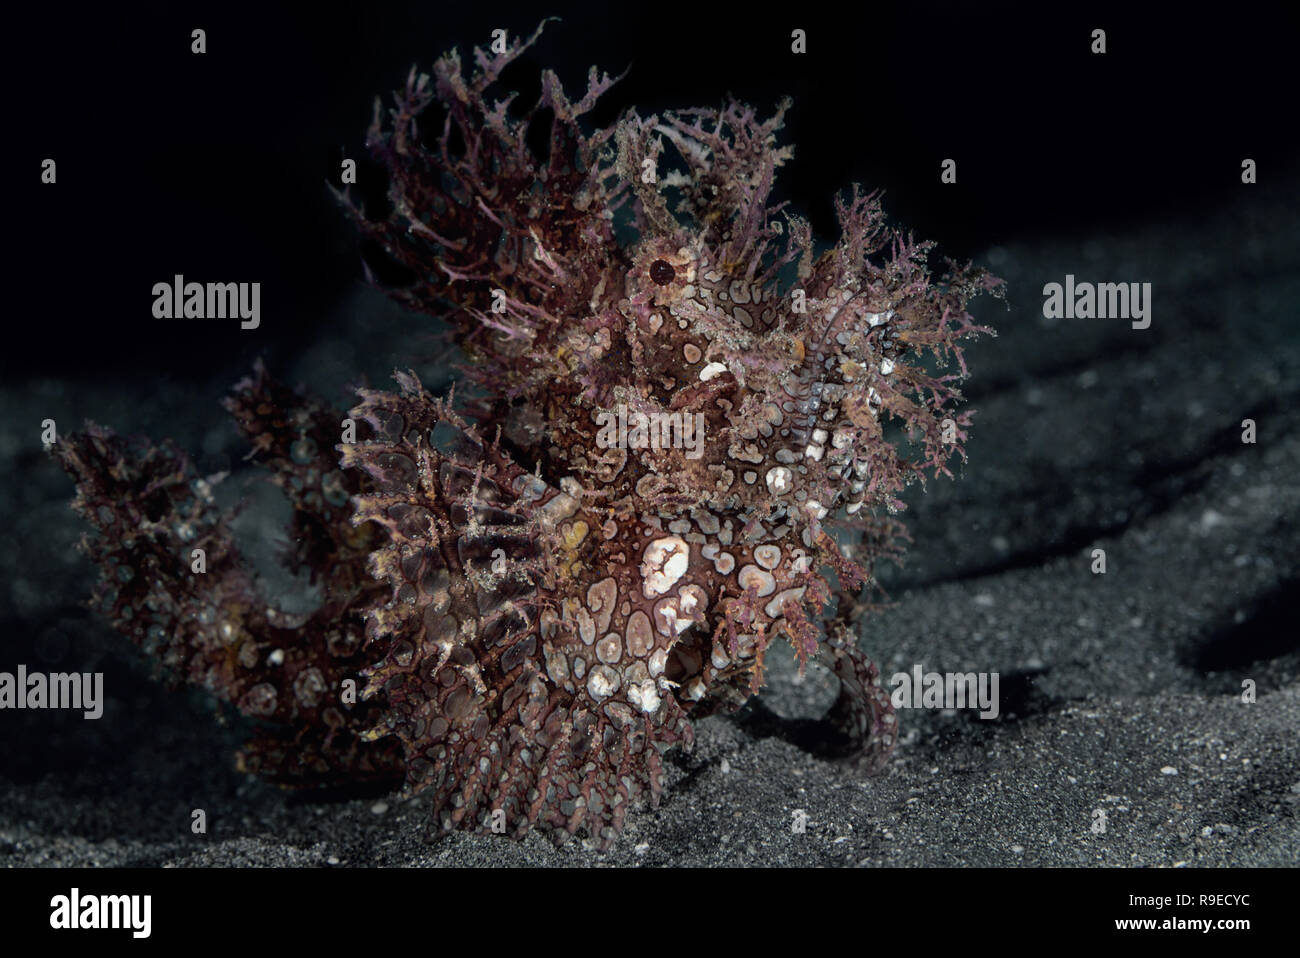 Close up portrait of the Lacy scorpionfish Stock Photo